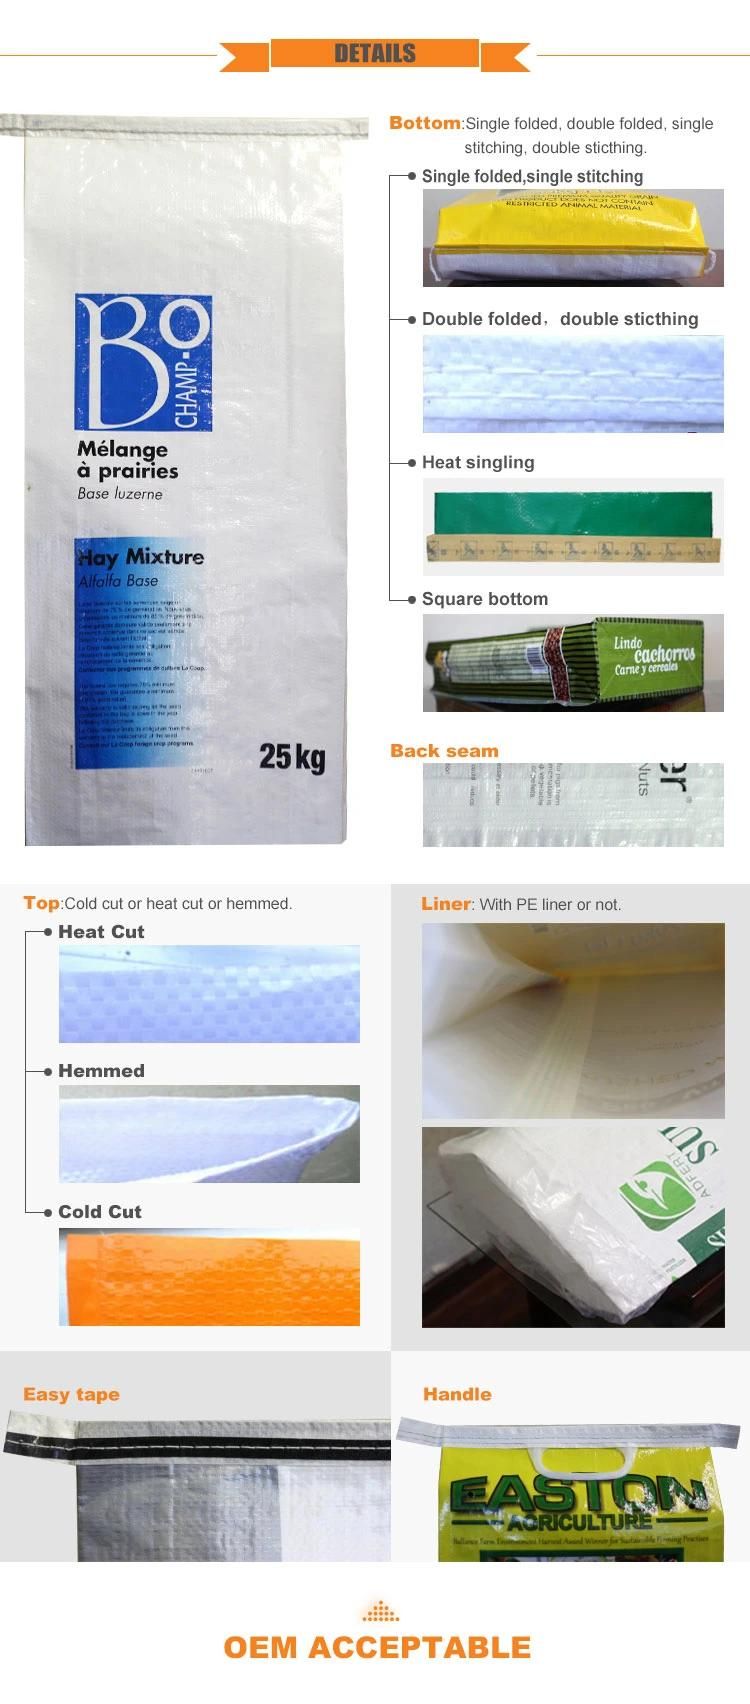 China Factory Price 25kg Polypropylene Woven BOPP PP Laminated BOPP Printing Woven Lawn Seed in Bags 50kg